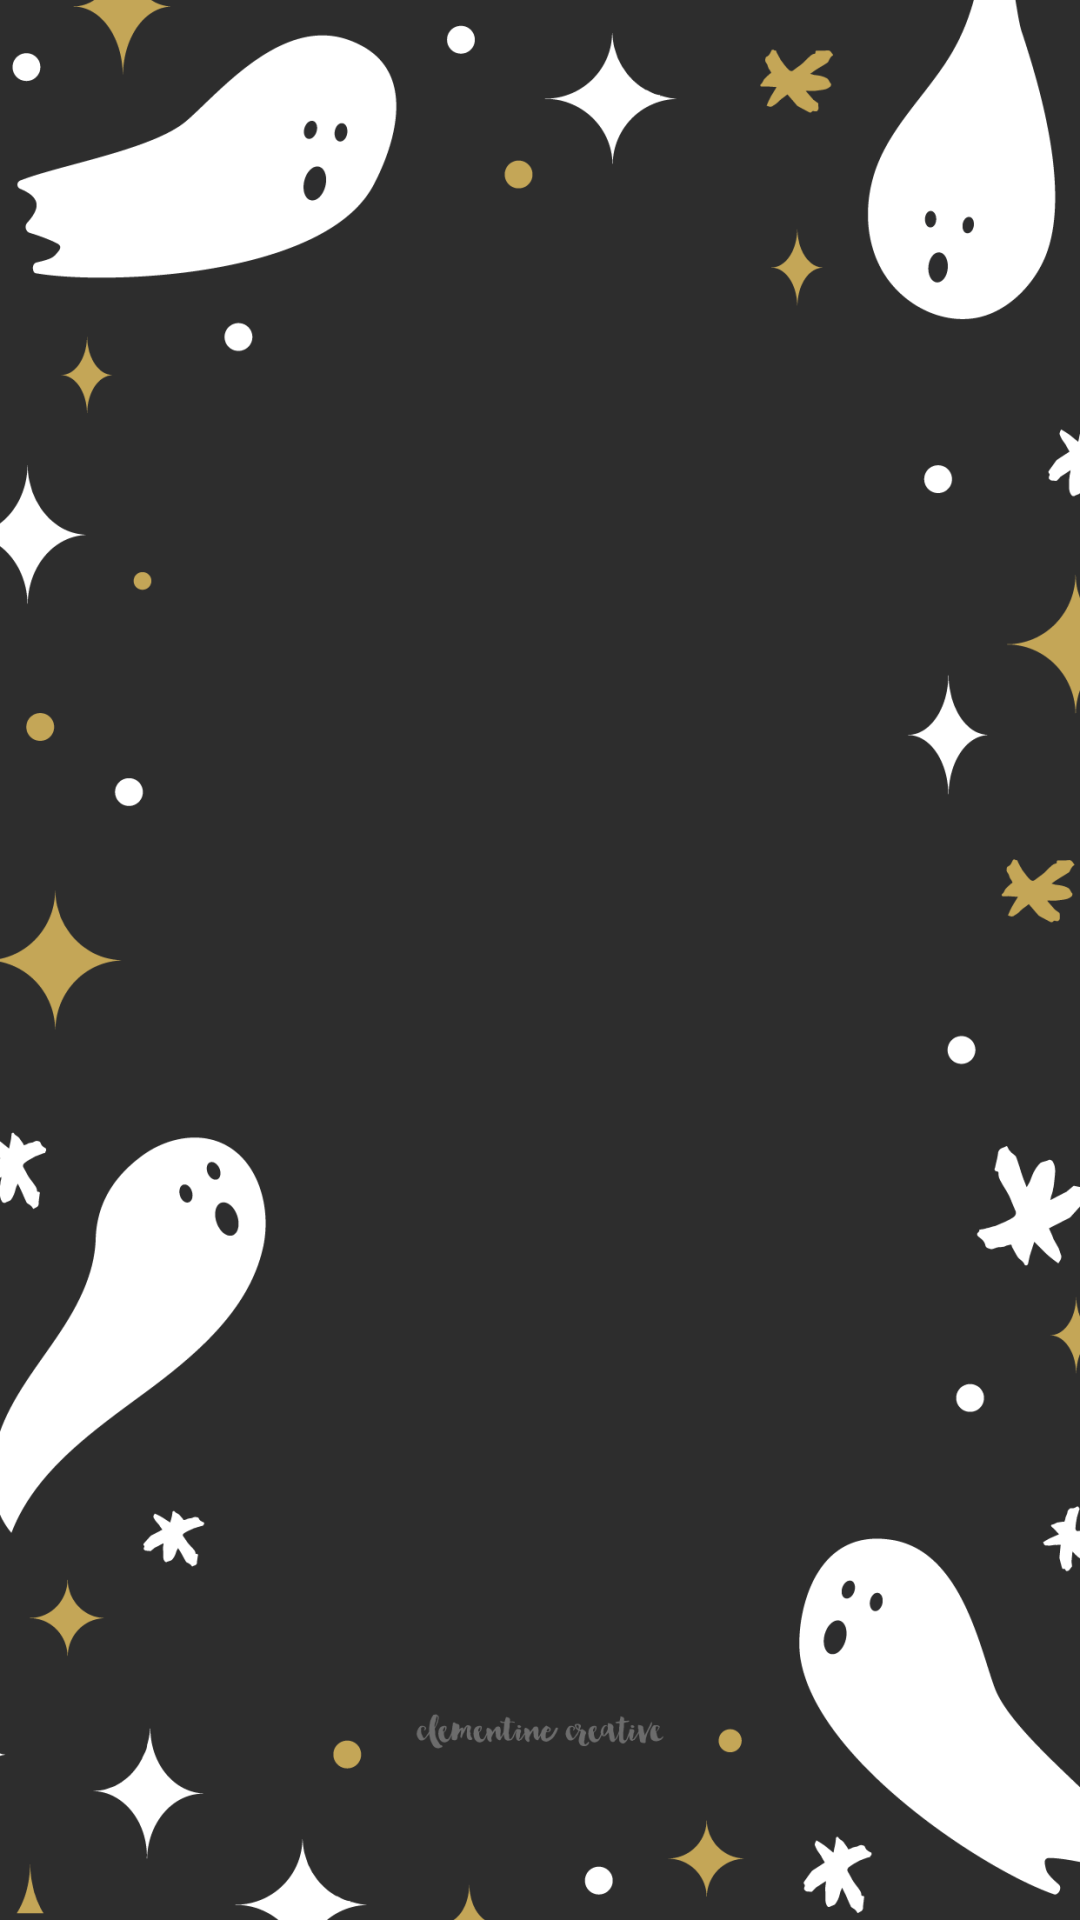 Cute Ghost Wallpaper I Found On Pinterest - Spooky Halloween Cell Phone , HD Wallpaper & Backgrounds